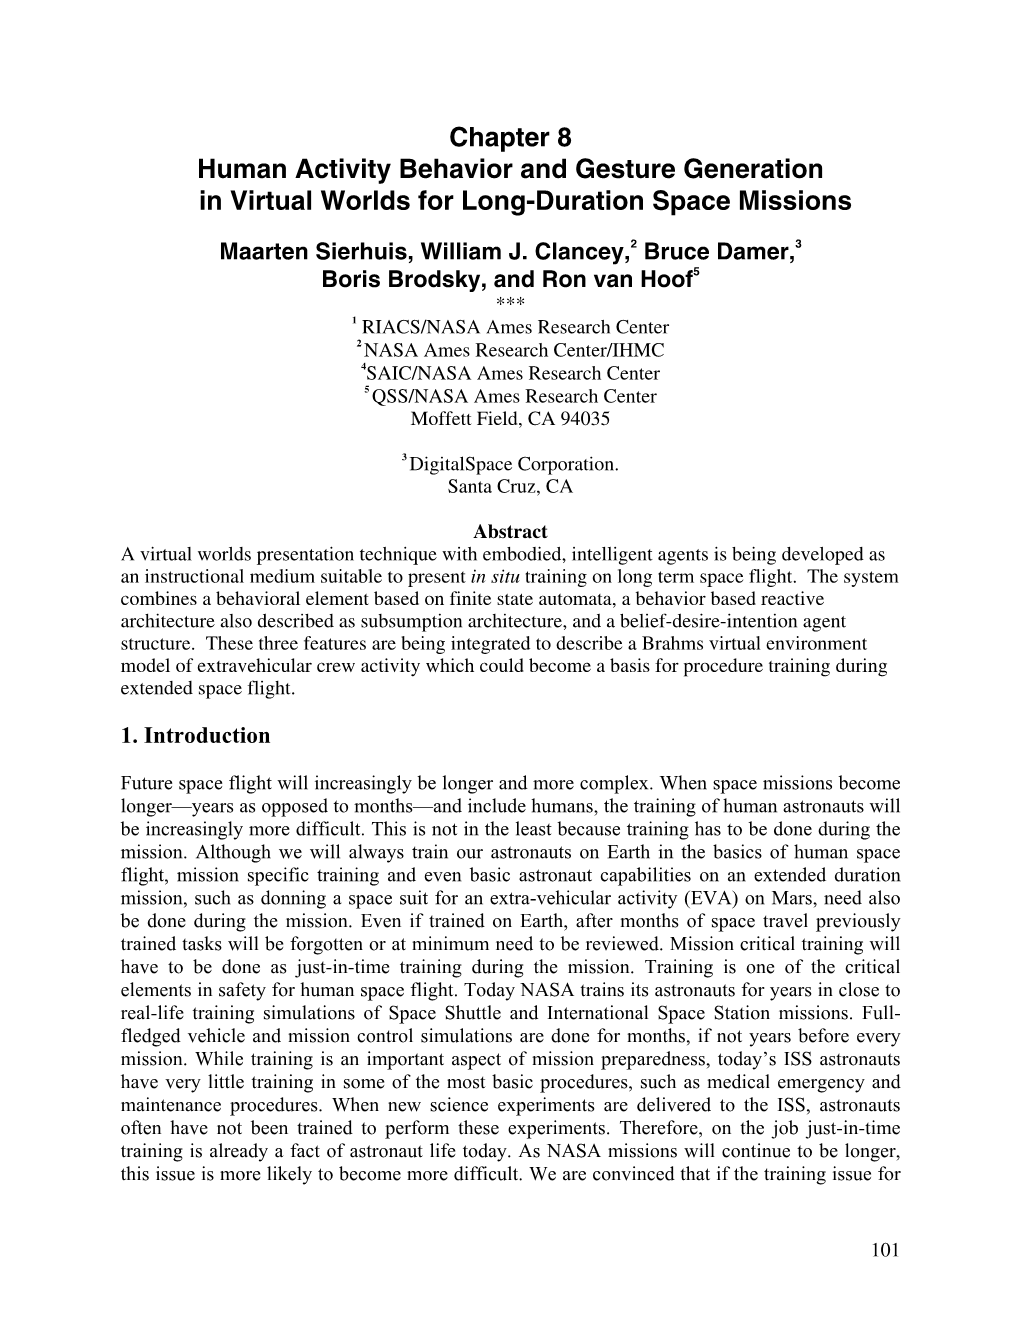 Chapter 8 Human Activity Behavior and Gesture Generation in Virtual Worlds for Long-Duration Space Missions